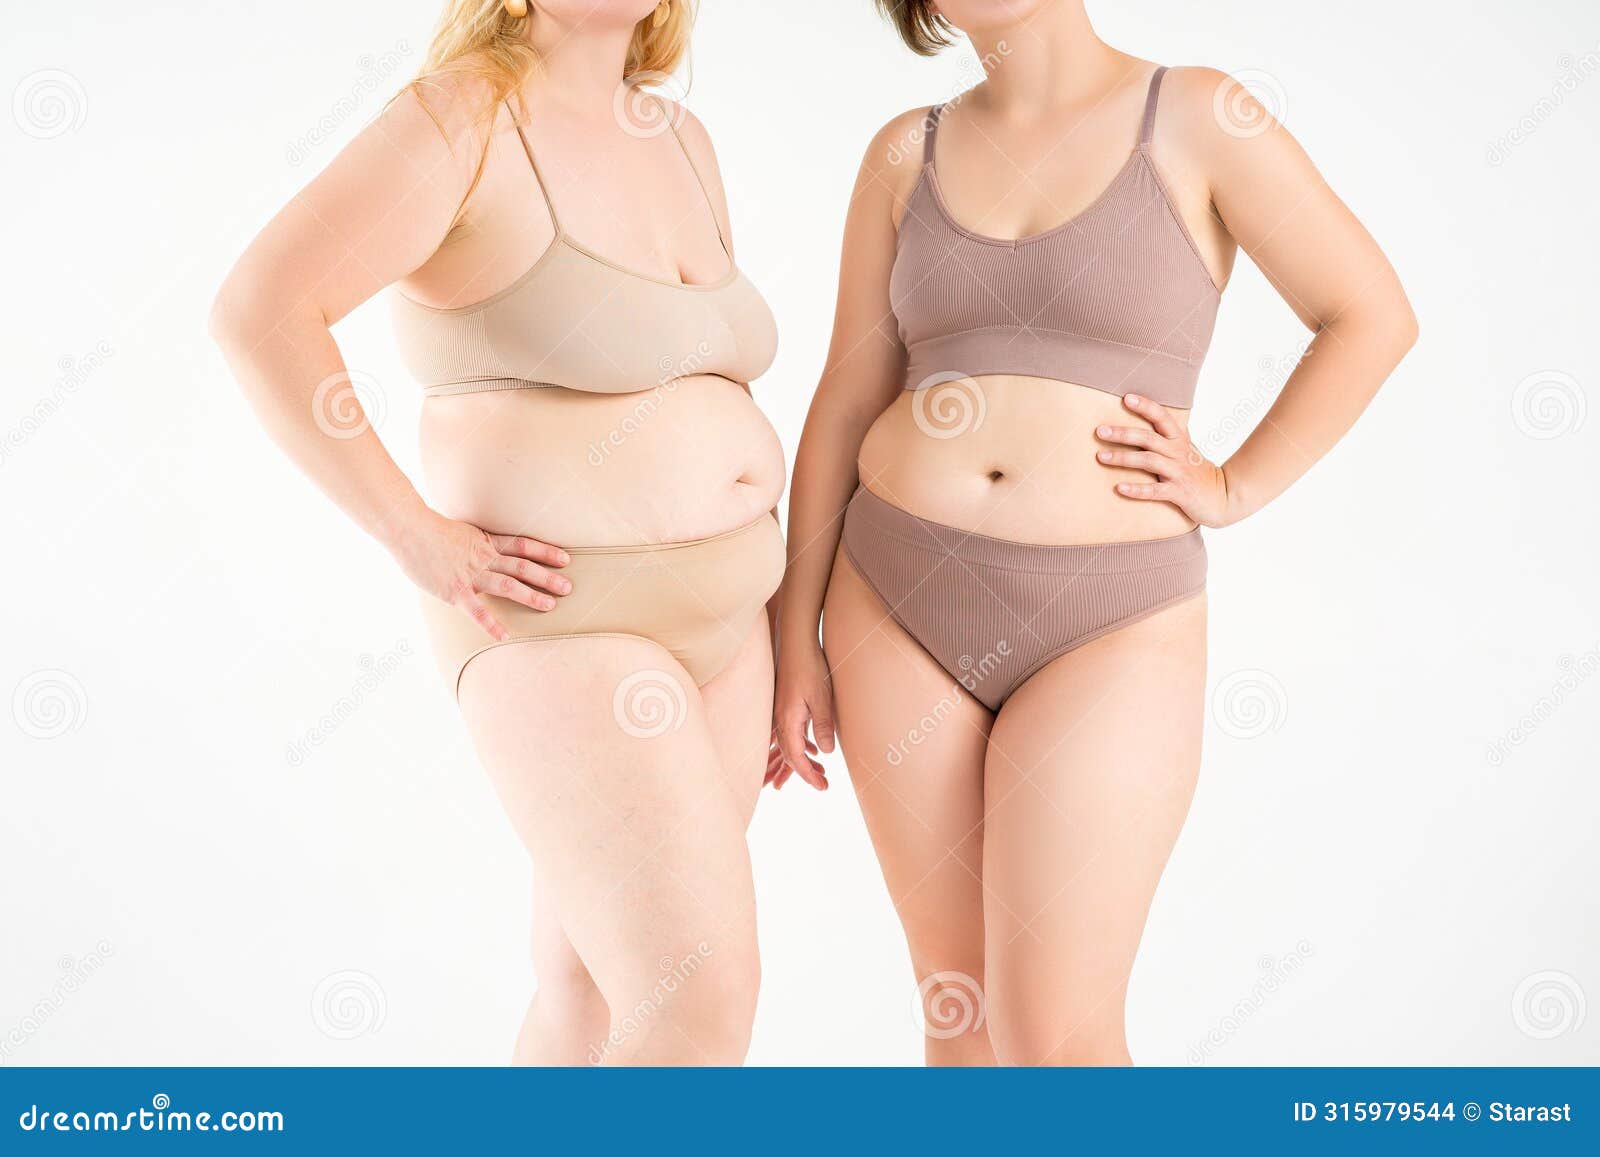 two overweight women with cellulitis, fat flabby bellies, legs, hands, hips and buttocks on gray background, obese female body,